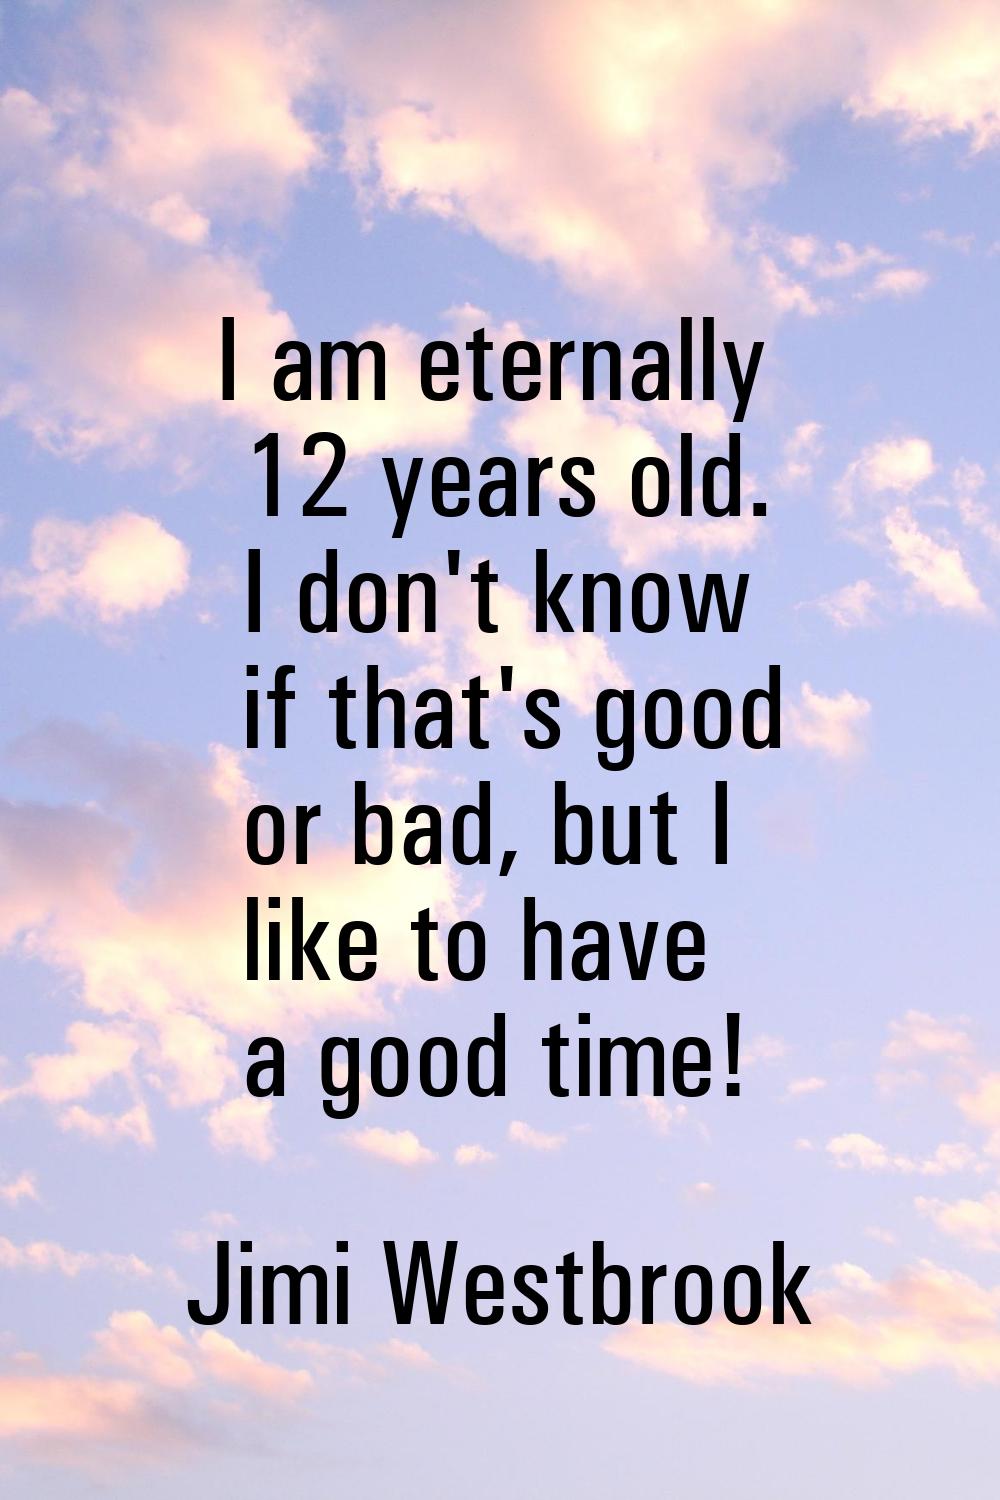 I am eternally 12 years old. I don't know if that's good or bad, but I like to have a good time!